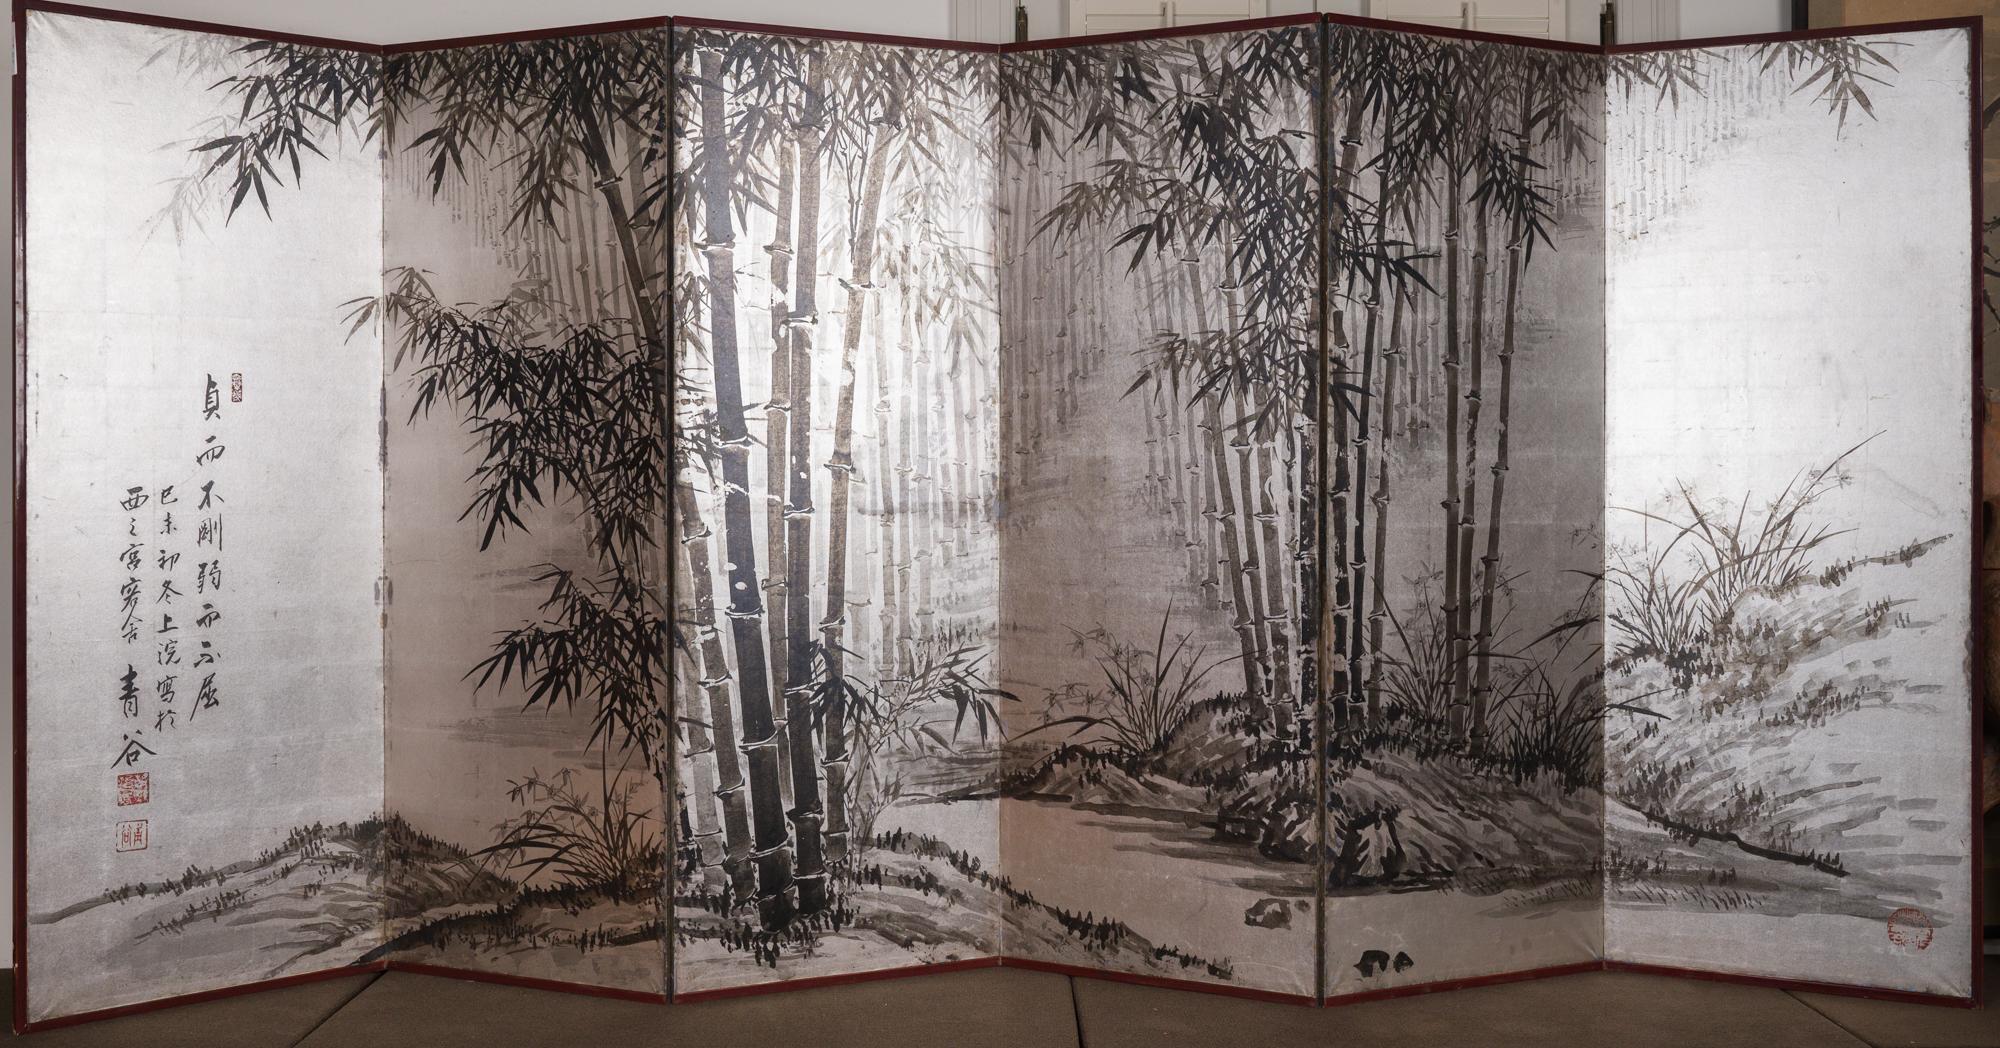 Ink painting of bamboo on nicely patinated silver leaf. Dated 1919, Signature reads: Seikoku.